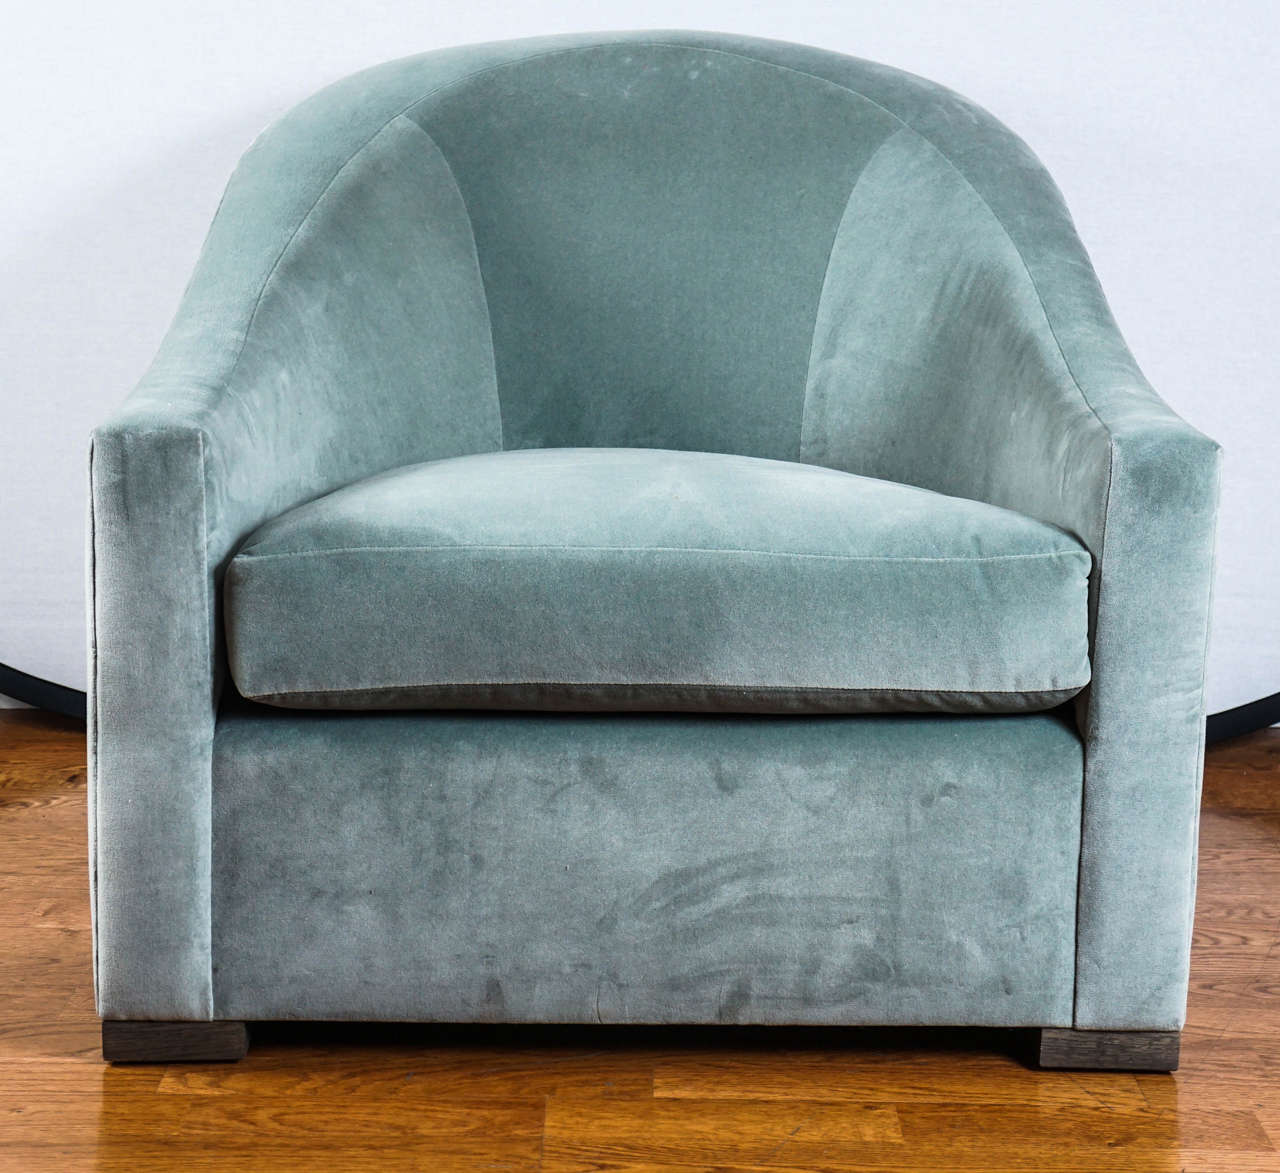 soft, calming, sea foam green velvet upholstered chair, by Designer, James Huniford.
with it's pleasing rounded back and square wooden feet, this club chair is not only beautiful, it's extremely comfy!